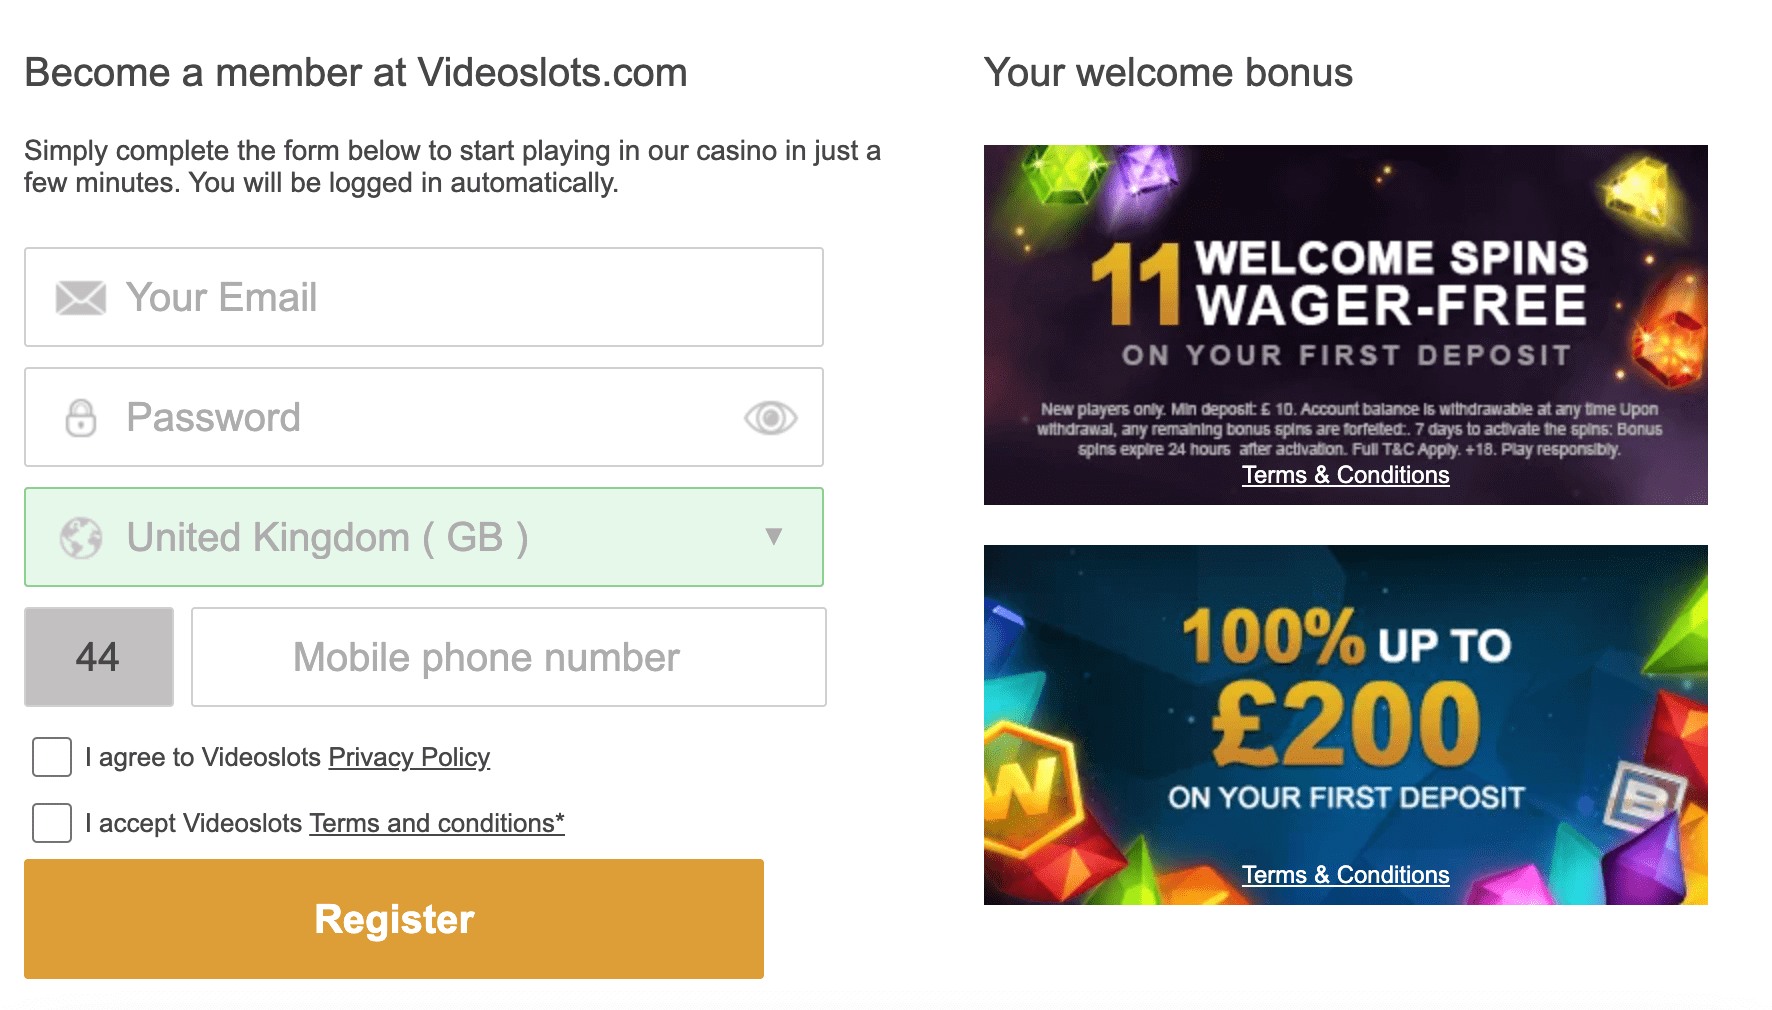 Register with Videoslots - How to register 